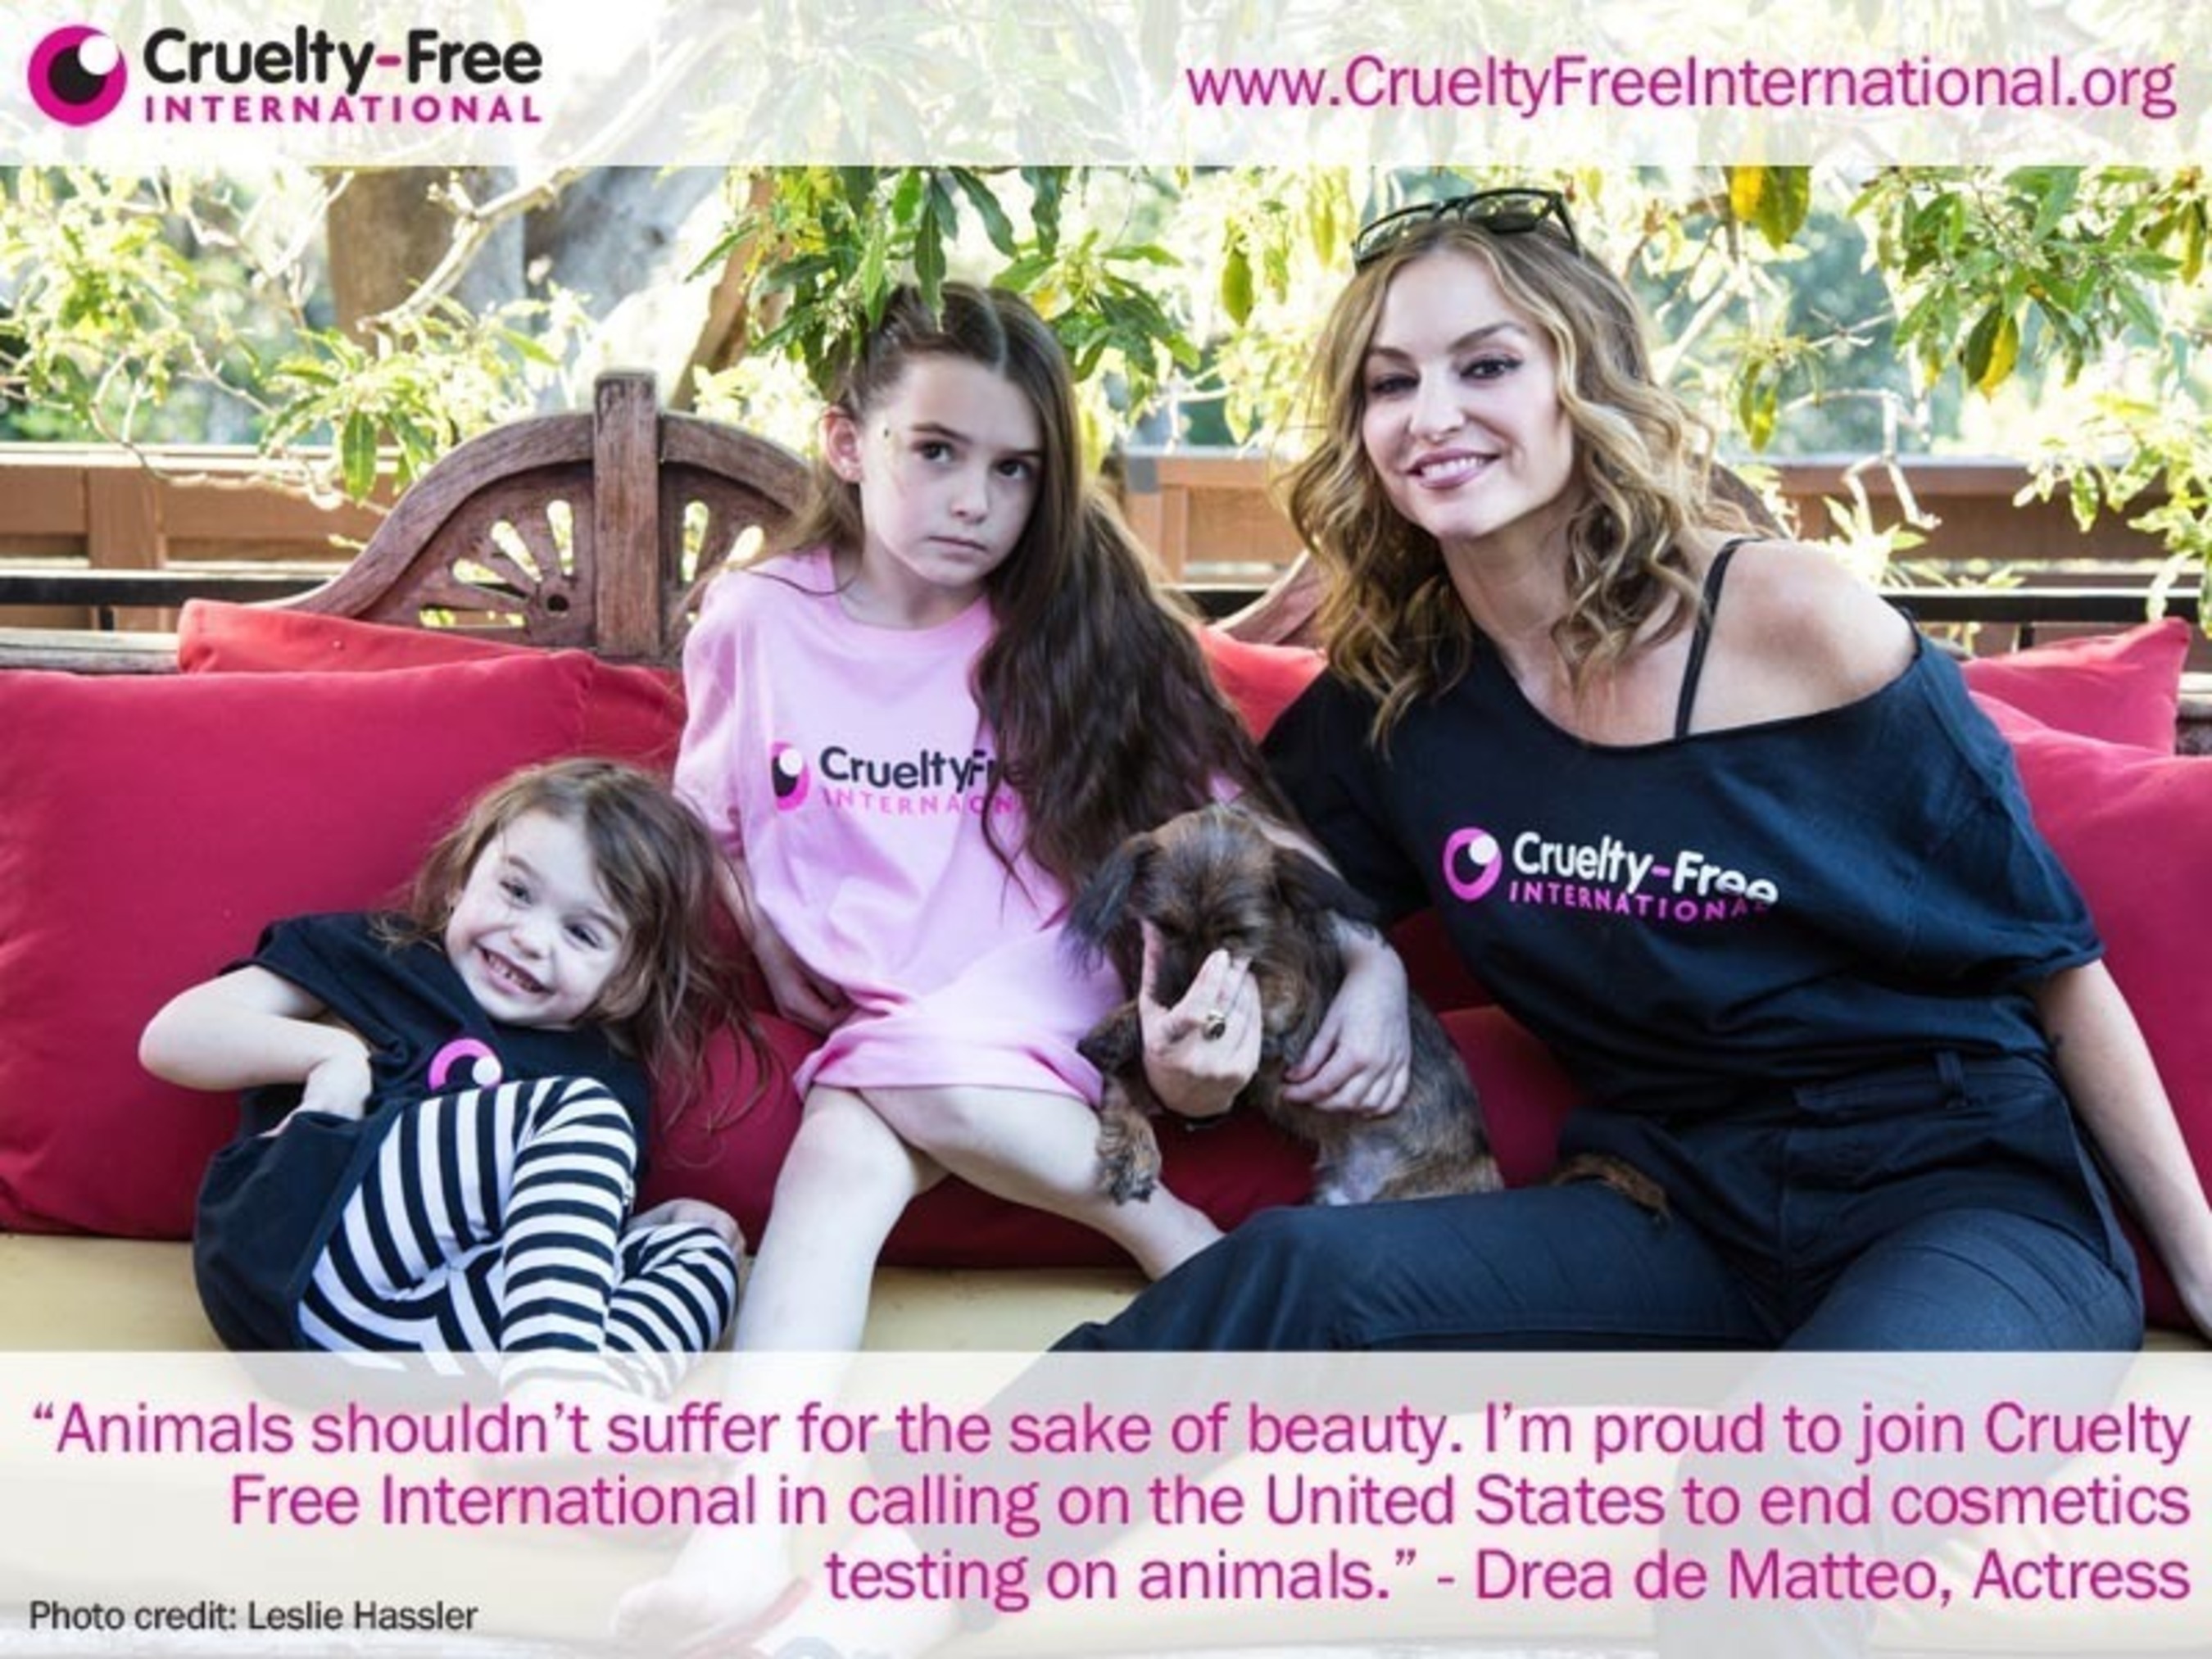 On World Day for Animals in Laboratories (April 24th), former Sopranos actress Drea de Matteo teams up with Cruelty Free International and its campaign to end cosmetics testing on animals in the US. Pictured with her daughter, son and rescue pup Blankie, Drea who recently guest starred in Marvels' Agents of S.H.I.E.L.D said, "Animals shouldn't suffer for the sake of beauty. I'm proud to join Cruelty Free International in calling on the United States to end cosmetics testing on animals." www.crueltyfreeinternational.org (photo credit: Leslie Hassler). (PRNewsFoto/Cruelty Free International)